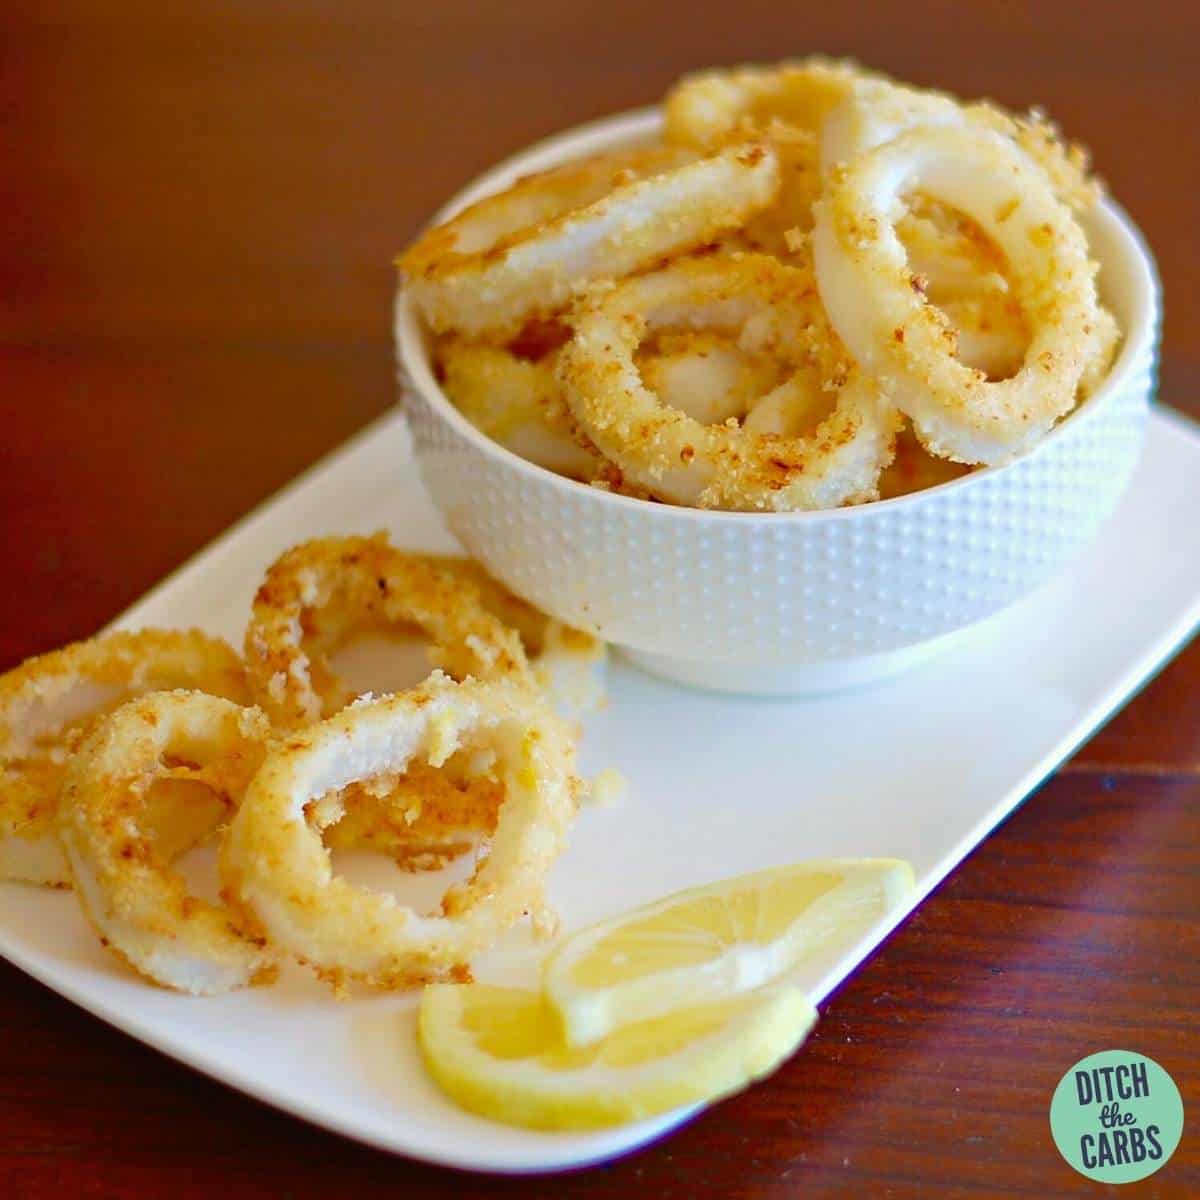 Sea Pride Walvis Bay - Crispy breaded squid rings are delicious with a  simple dip or added to pasta or salad. The perfect addition to any meal.  #instore | Facebook